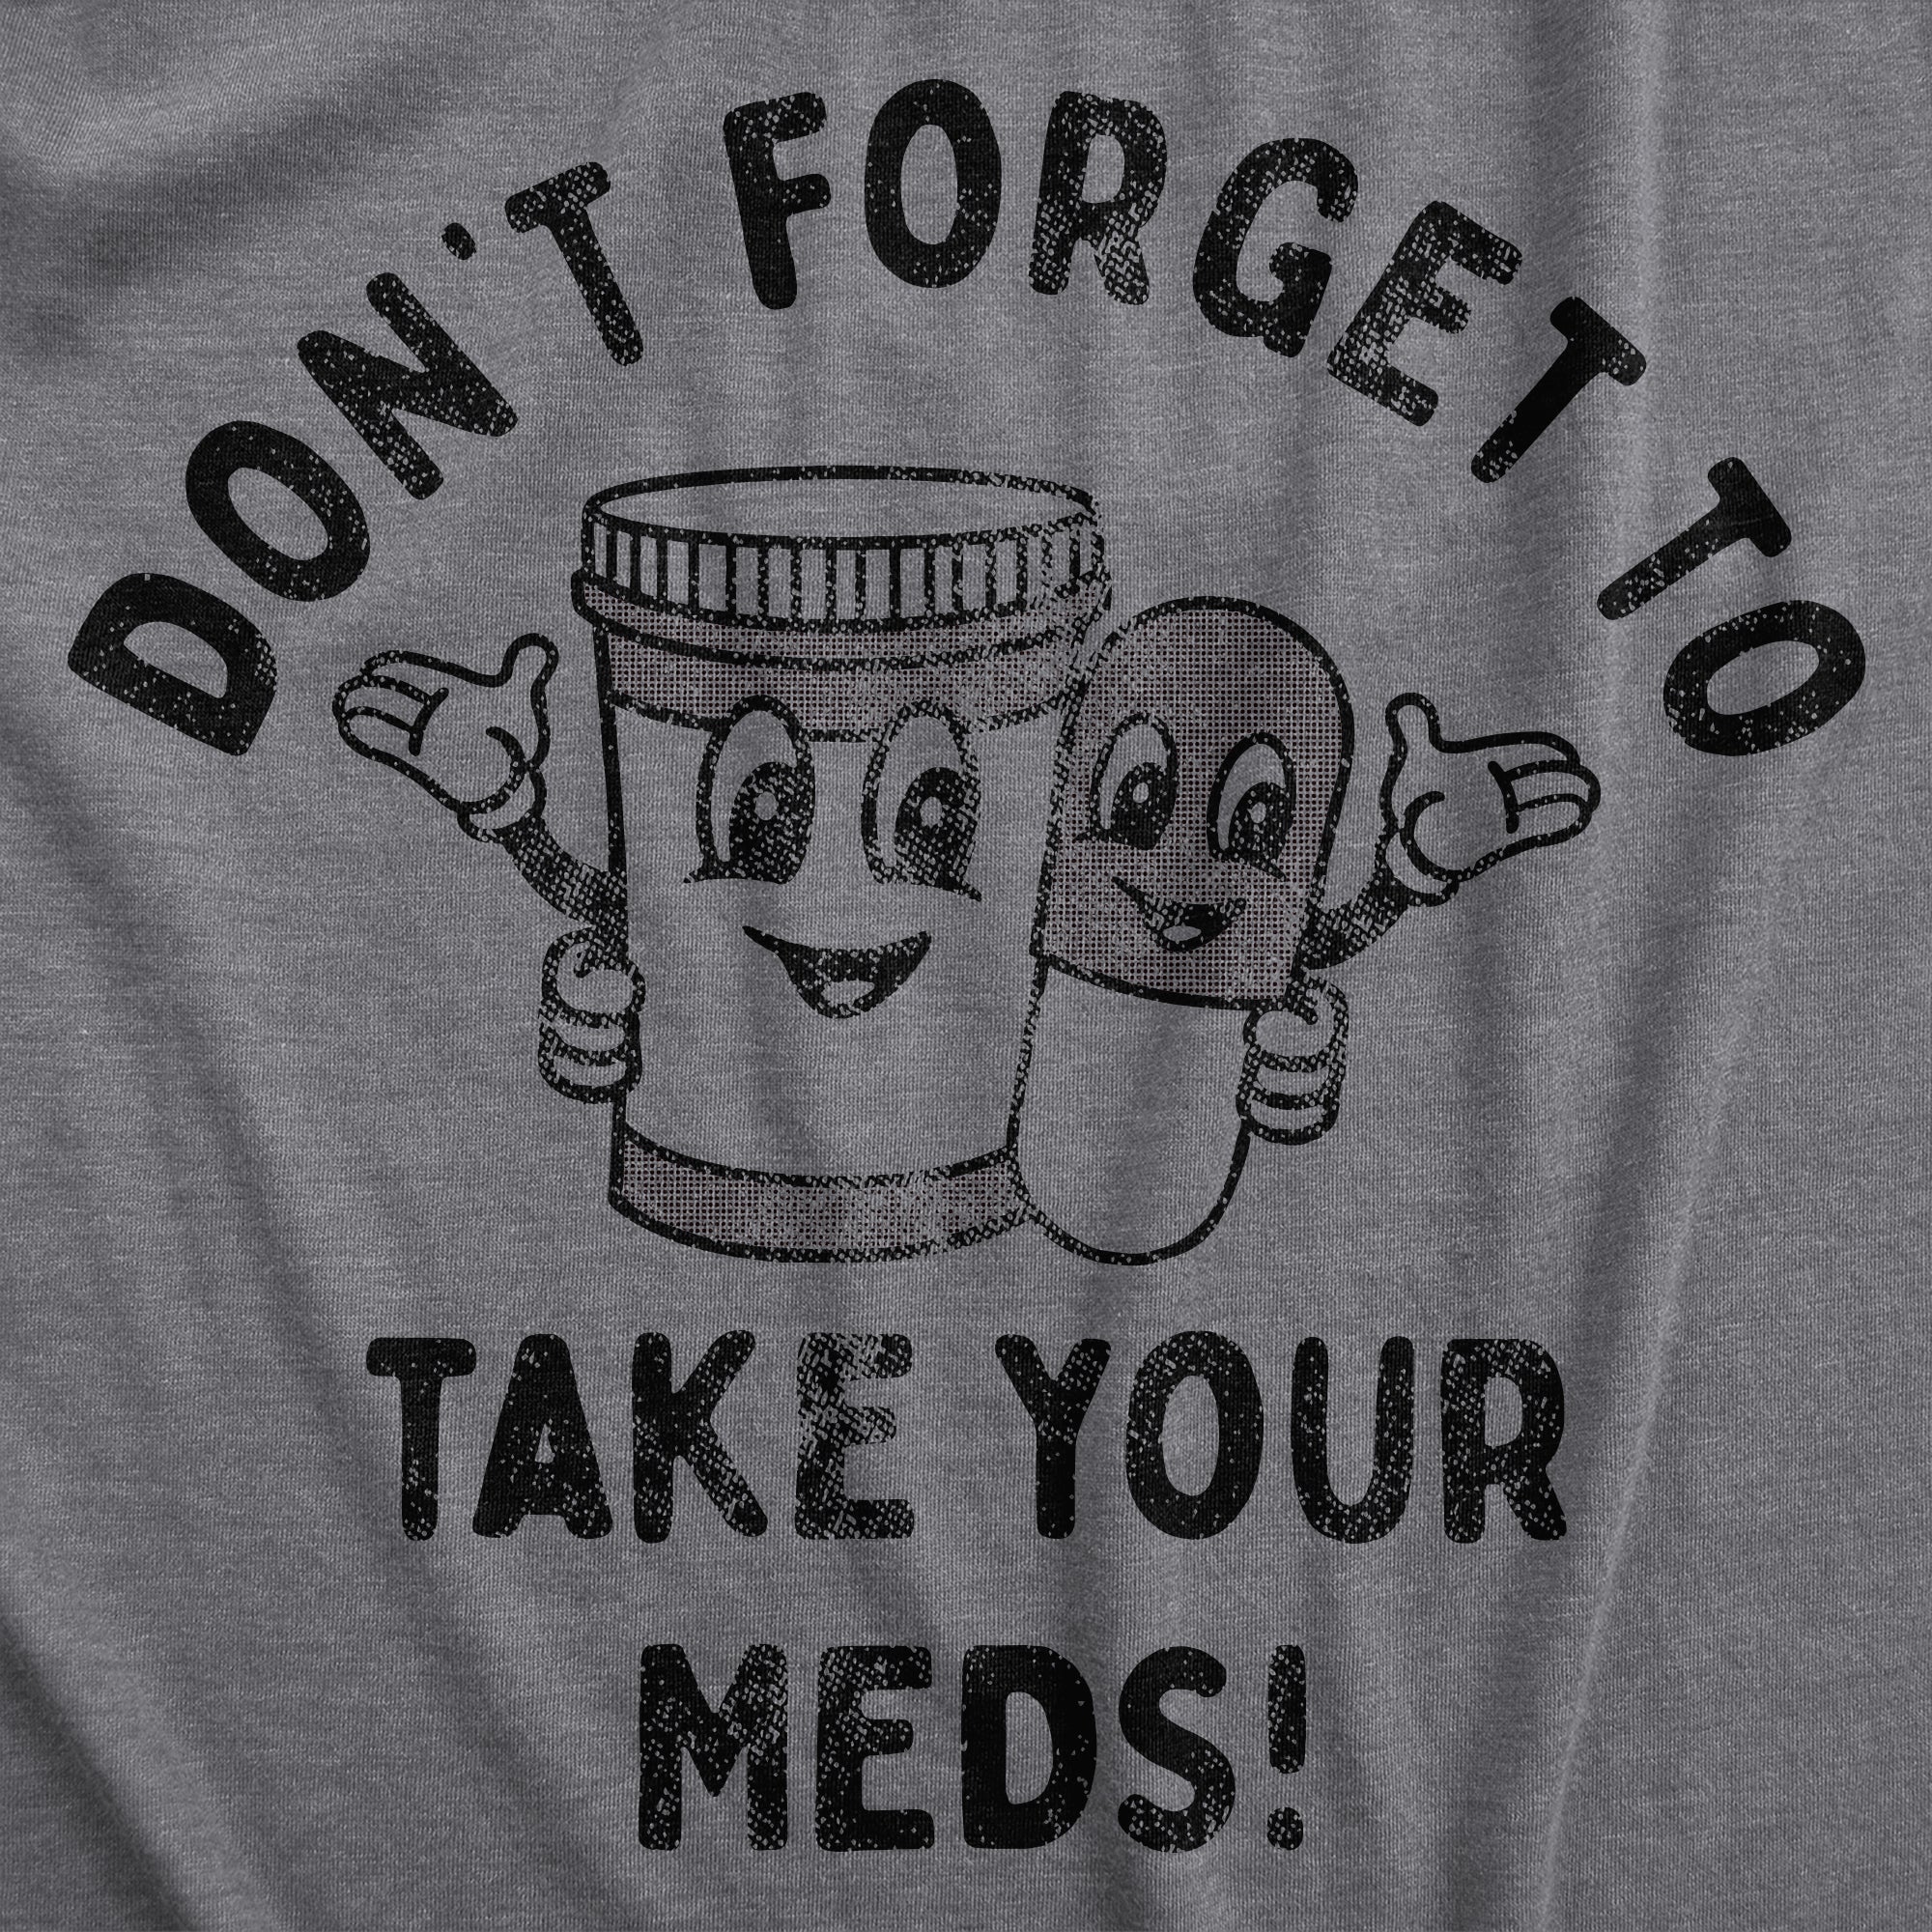 Funny Dark Heather Grey - MEDS Dont Forget To Take Your Meds Womens T Shirt Nerdy Sarcastic Tee